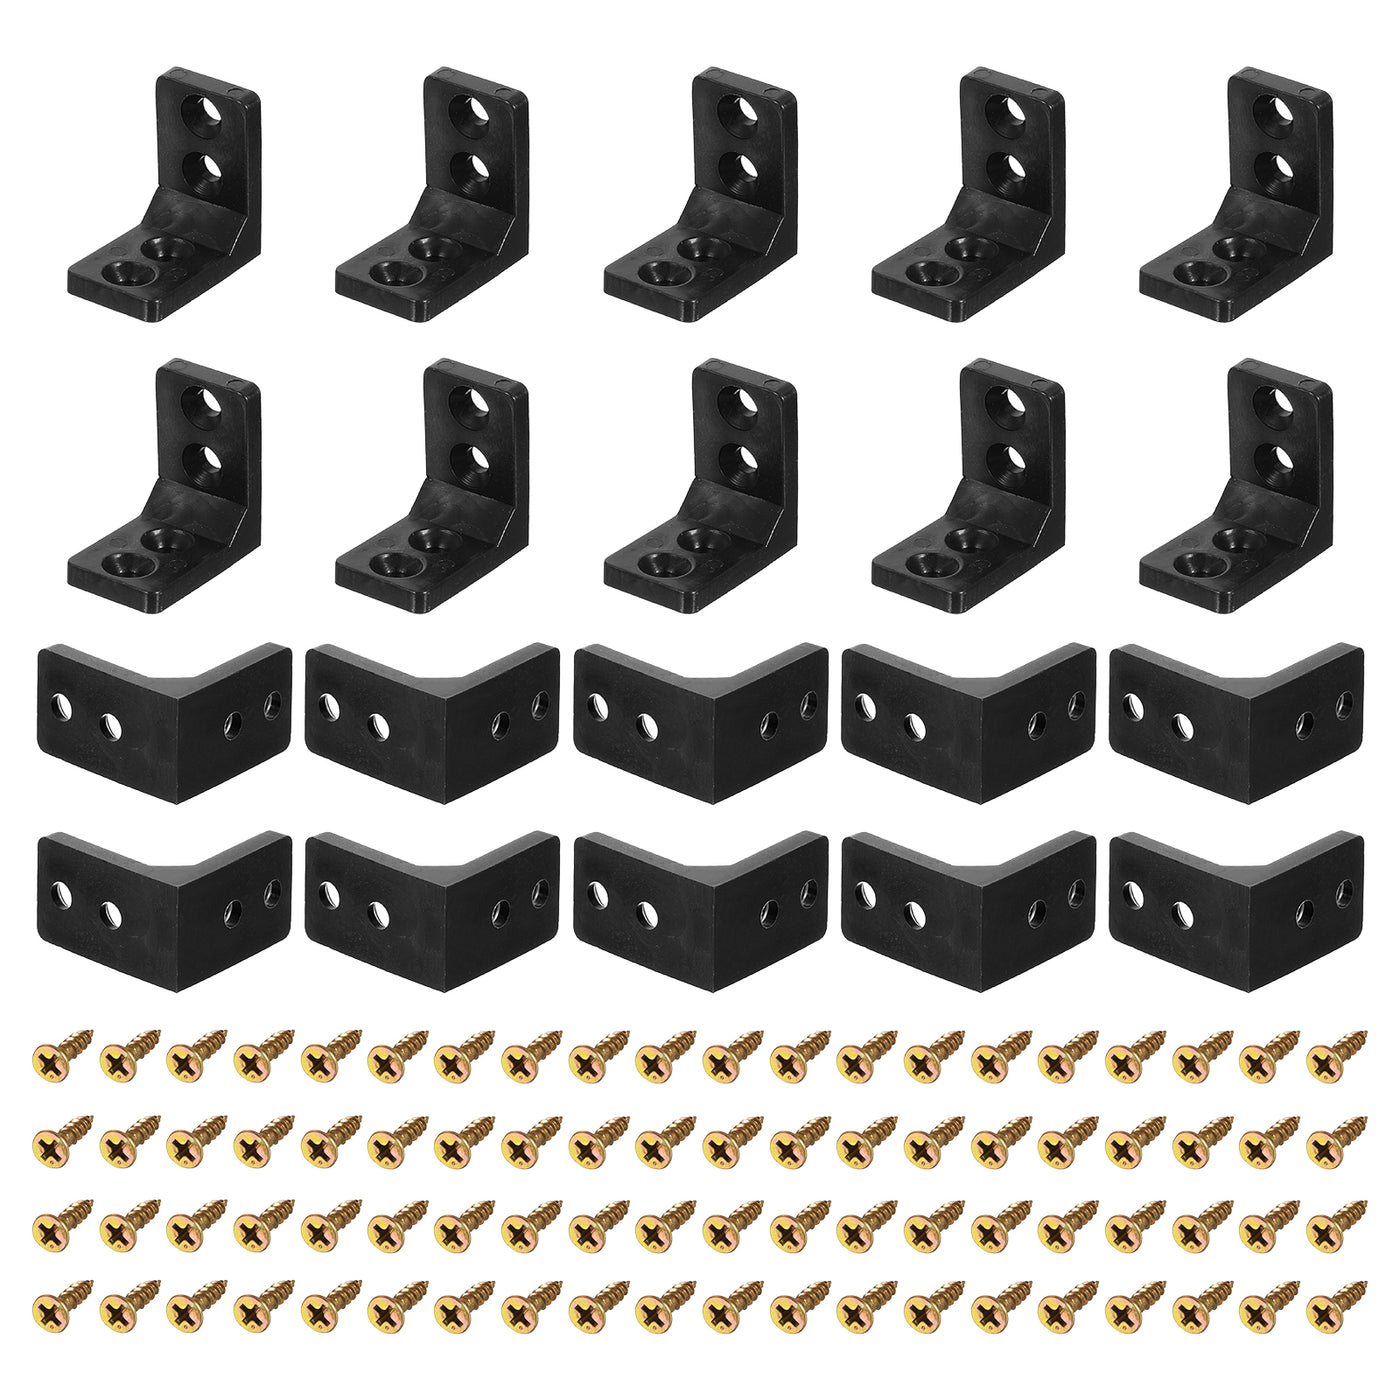 uxcell Uxcell 50Pcs 90 Degree Plastic Corner Braces, 16.5x27x27mm Nylon Shelf Right Angle Brackets with Screws for Cabinets, Cupboards (Black)